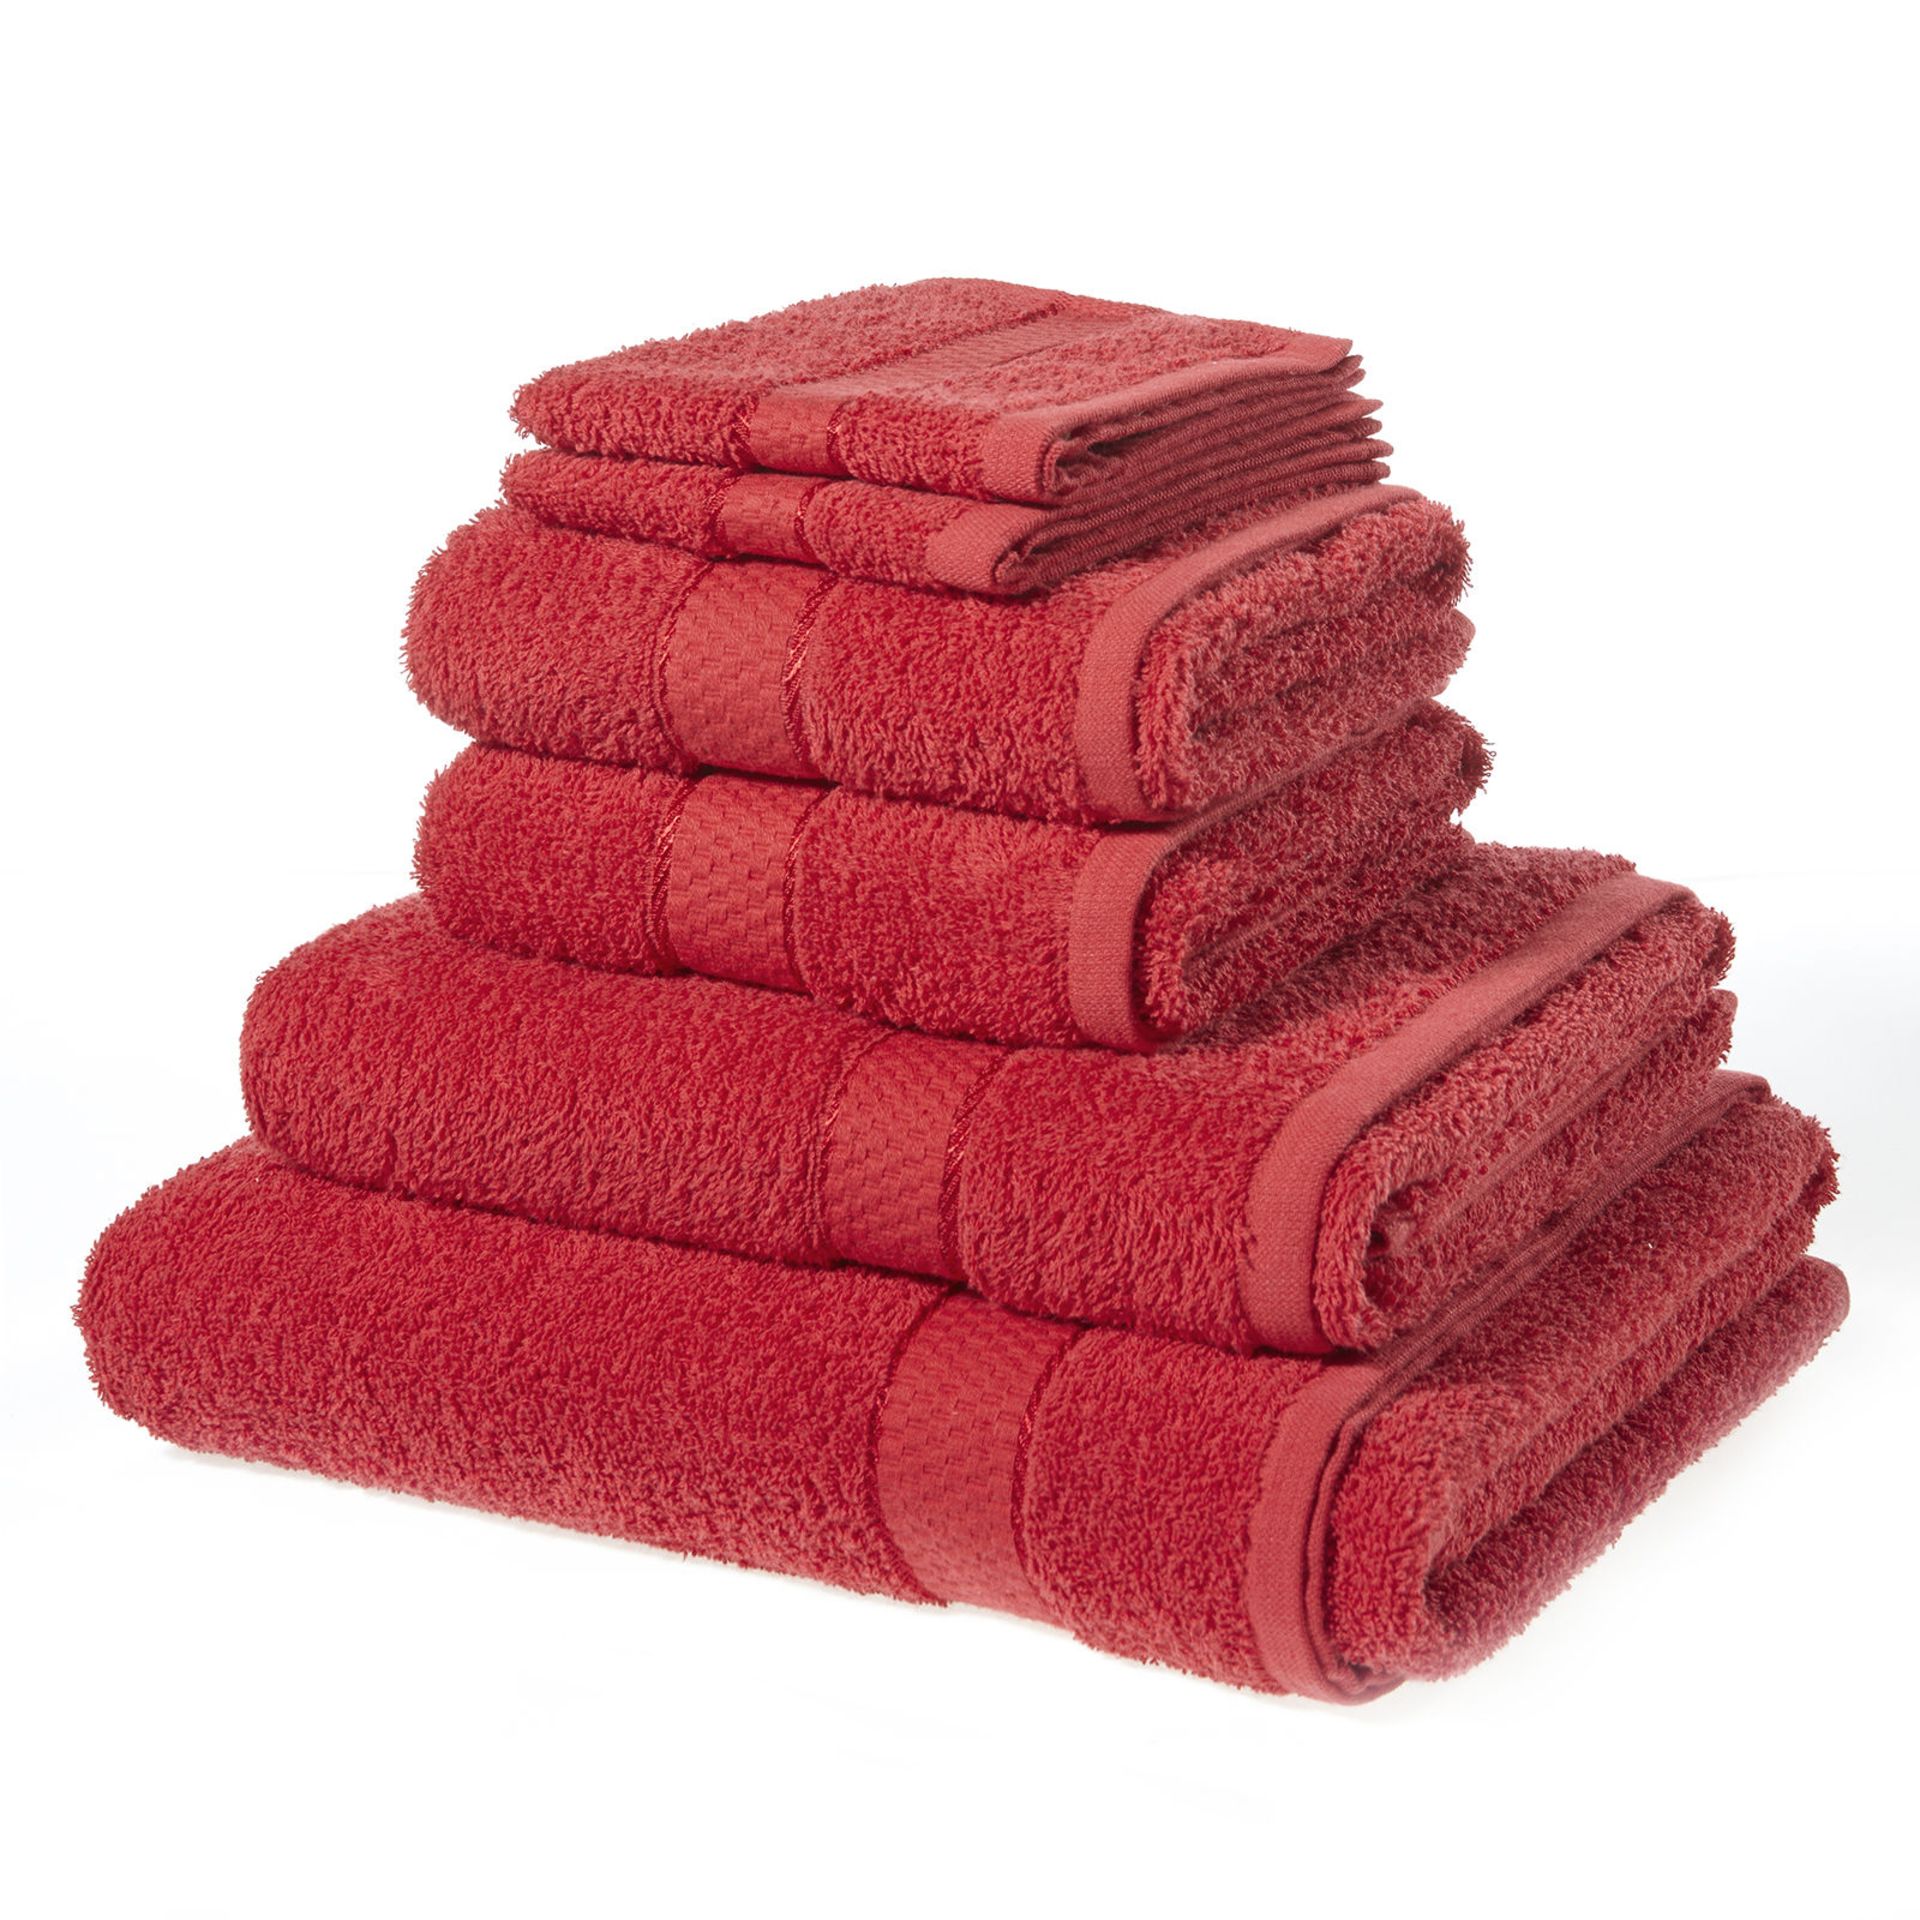 V Brand New Red 6 Piece Towel Bale Set With 2 Face Towels - 2 Hand Towels - 1 Bath Sheet - 1 Bath